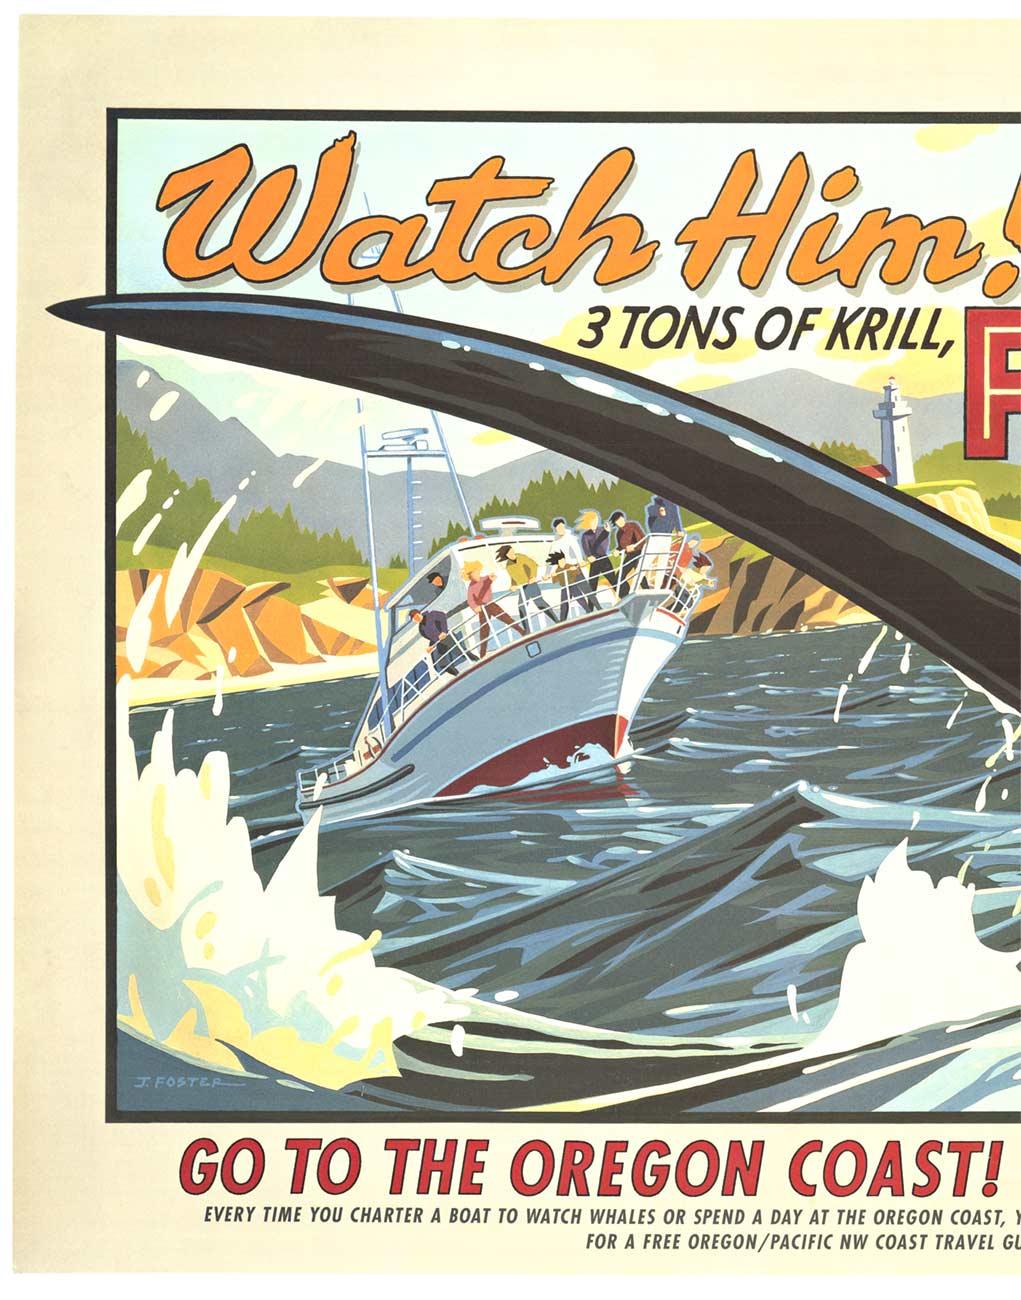 Original 'Watch Him! Feed Him! Go to the Oregon Coast!' vintage poster - Print by J Foster